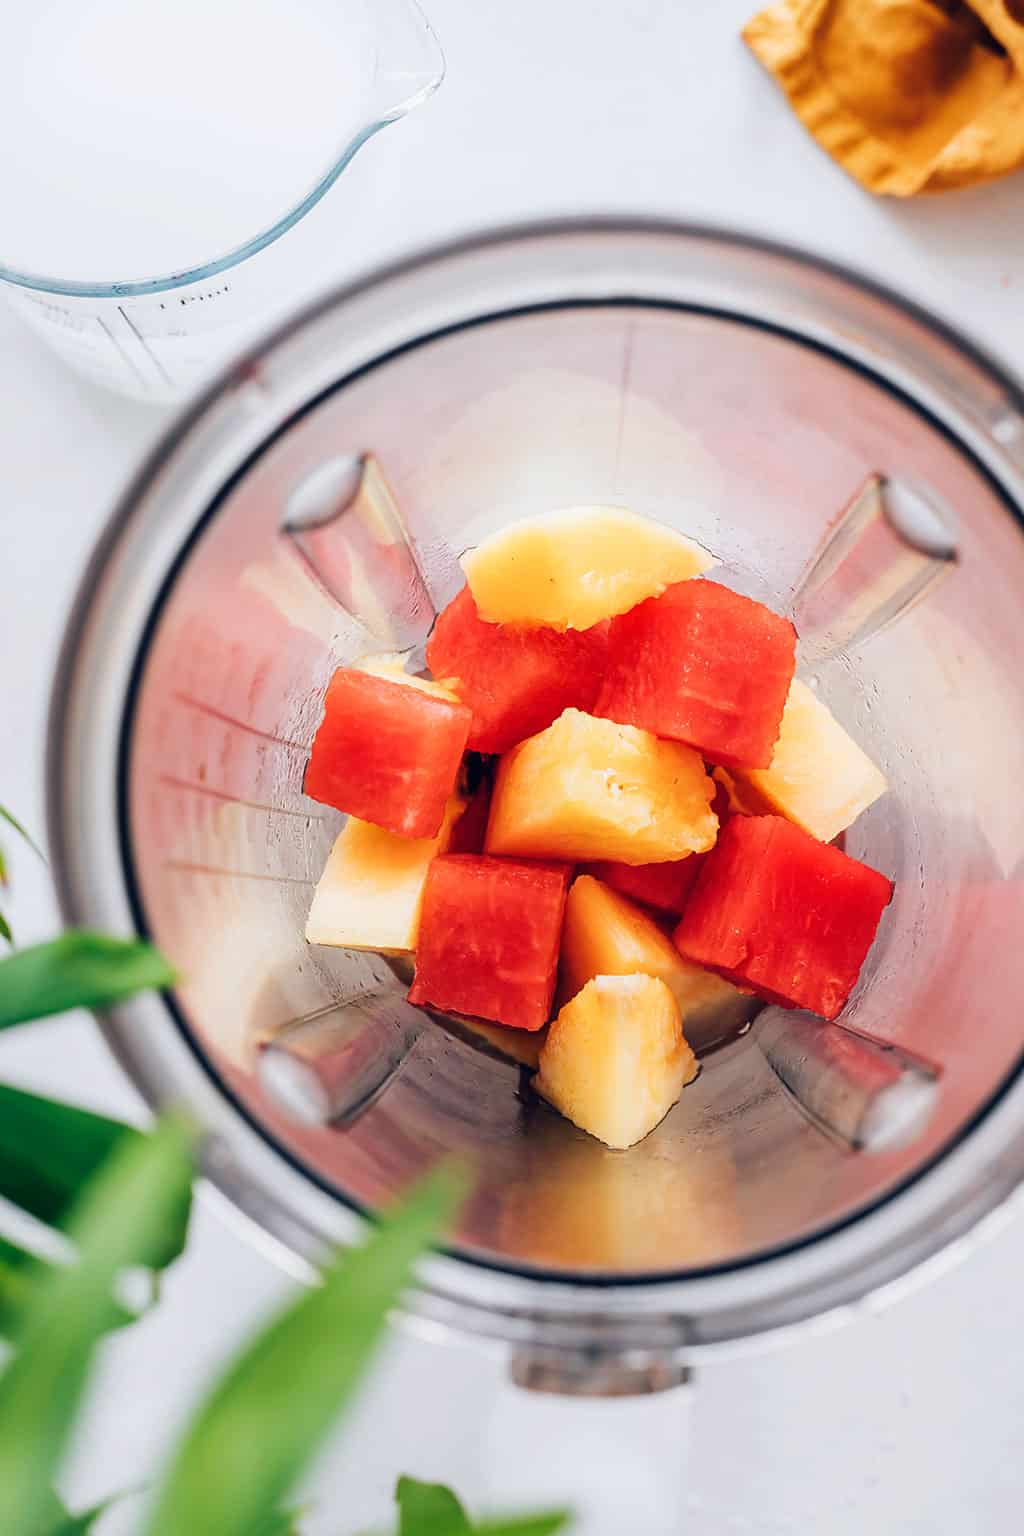 Coconut Water Smoothie Recipe with Watermelon